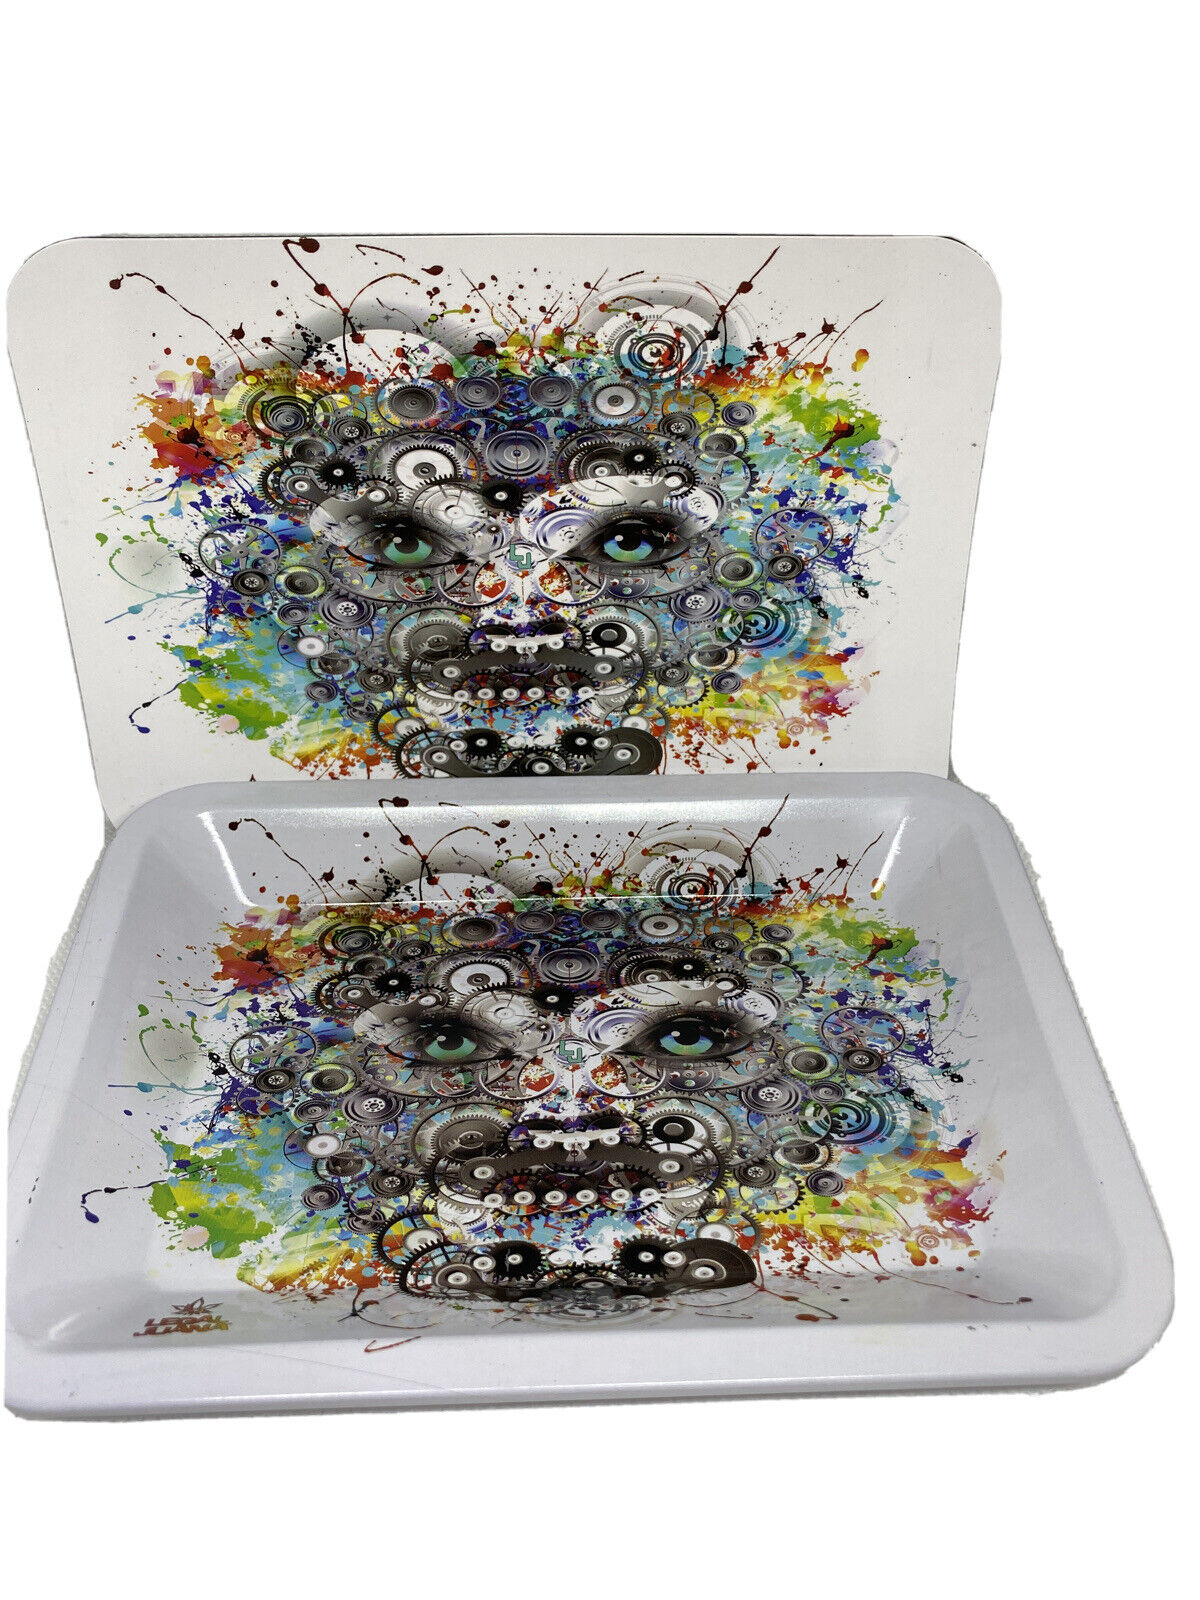 White Eyes Face Paint Rolling Tray 7 x 5 inch + Magnetic Lid Cover Combo Magnet